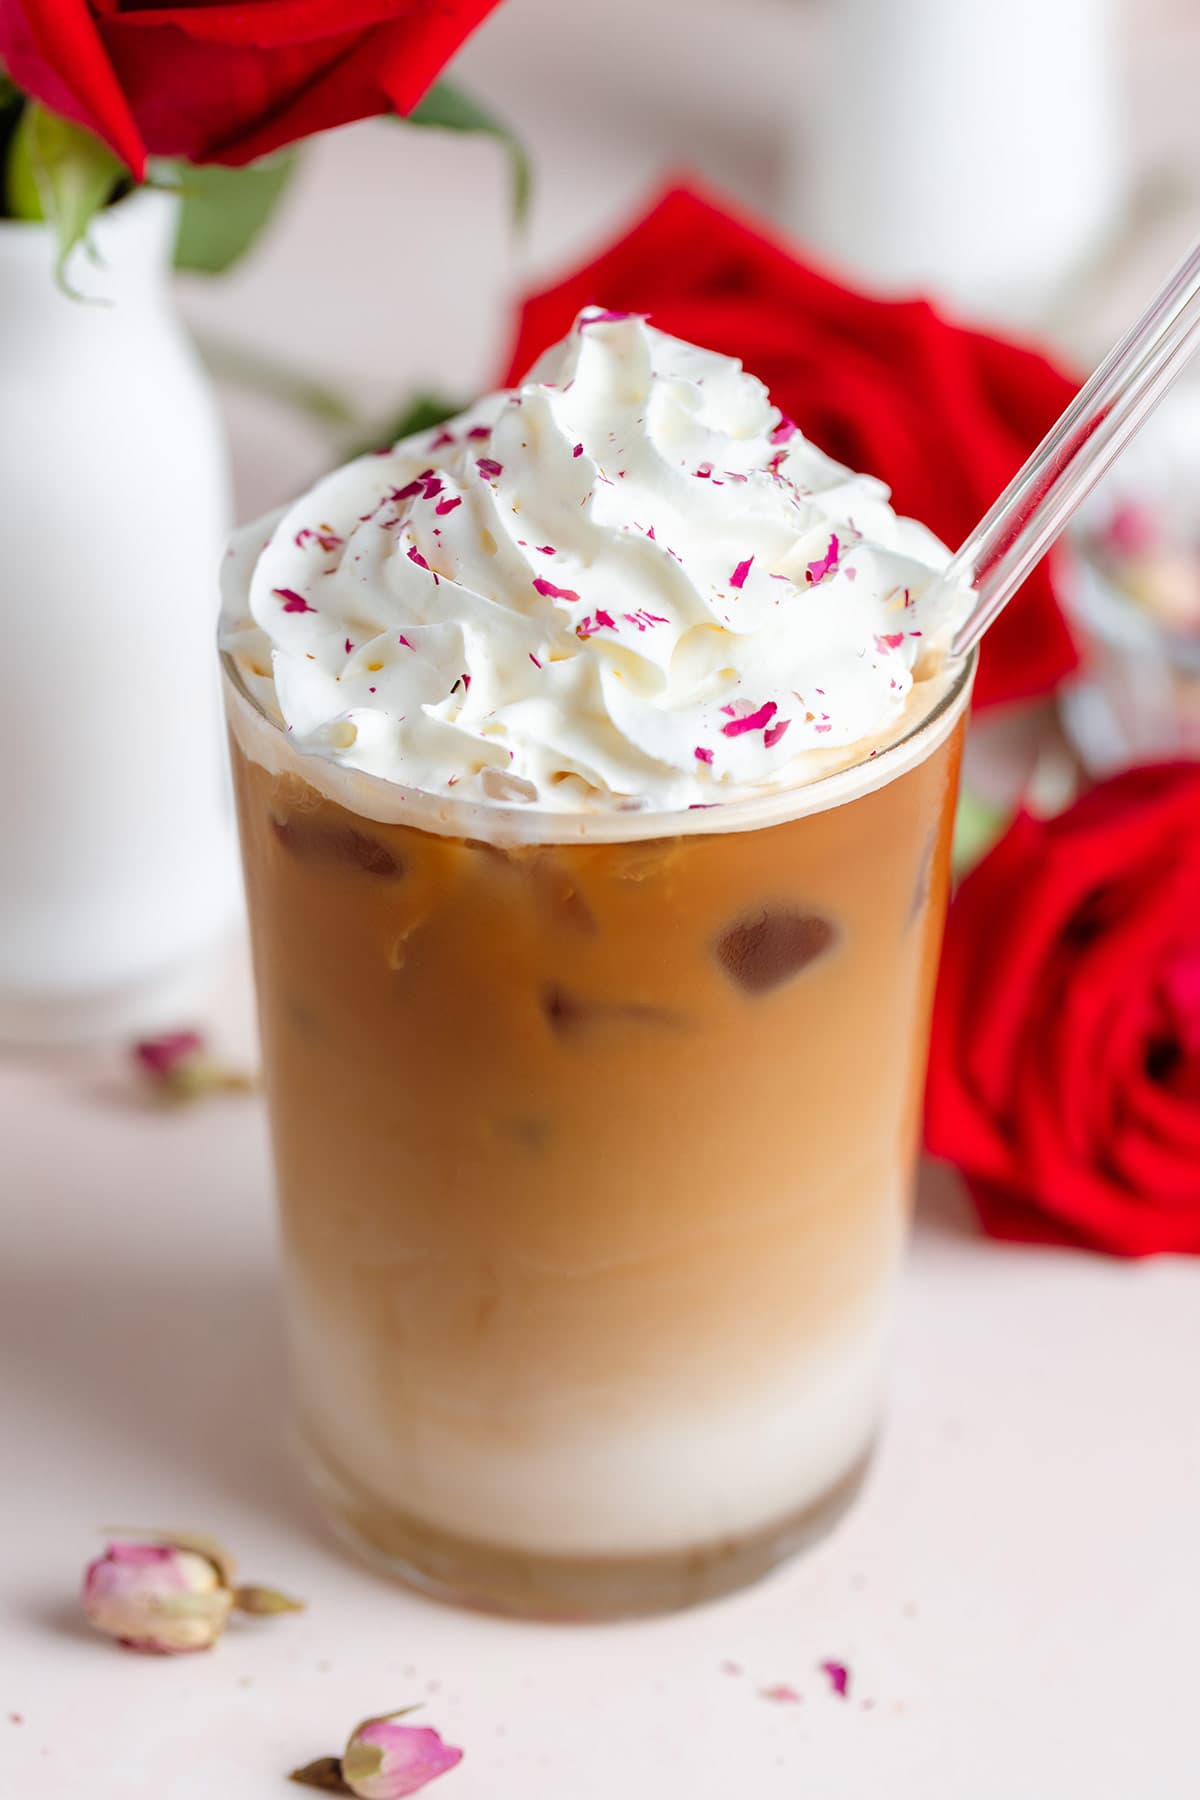 Iced latte with whipped cream and crushed dried rose petals sprinkled on top with a glass straw.